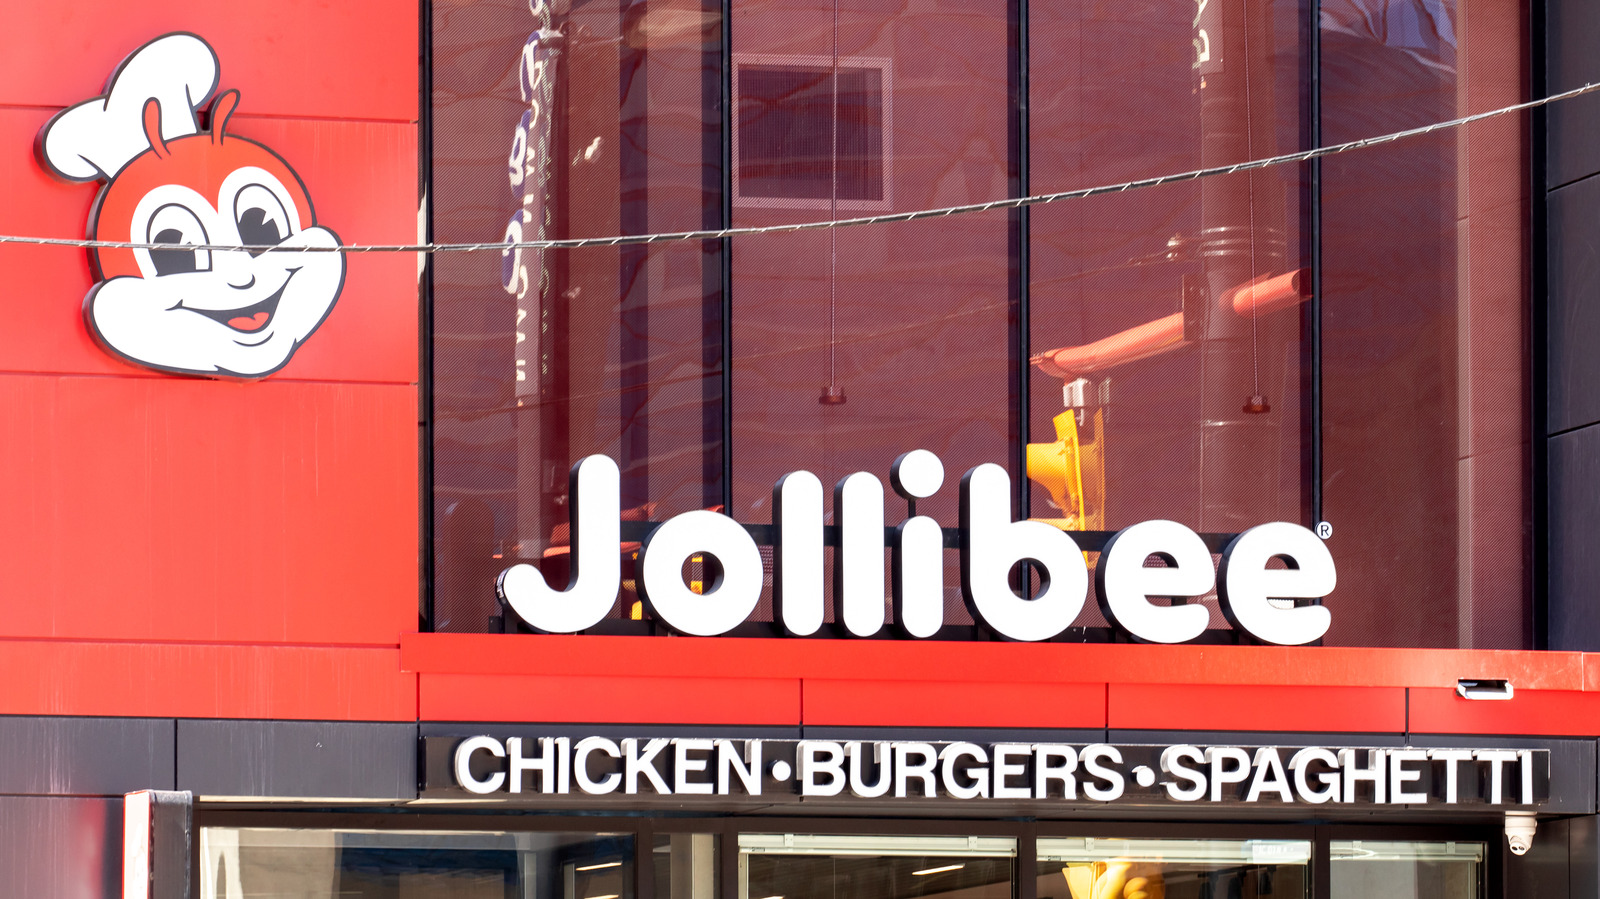 Jollibee Is Probably Going To Open A Location Near You. Here's Why